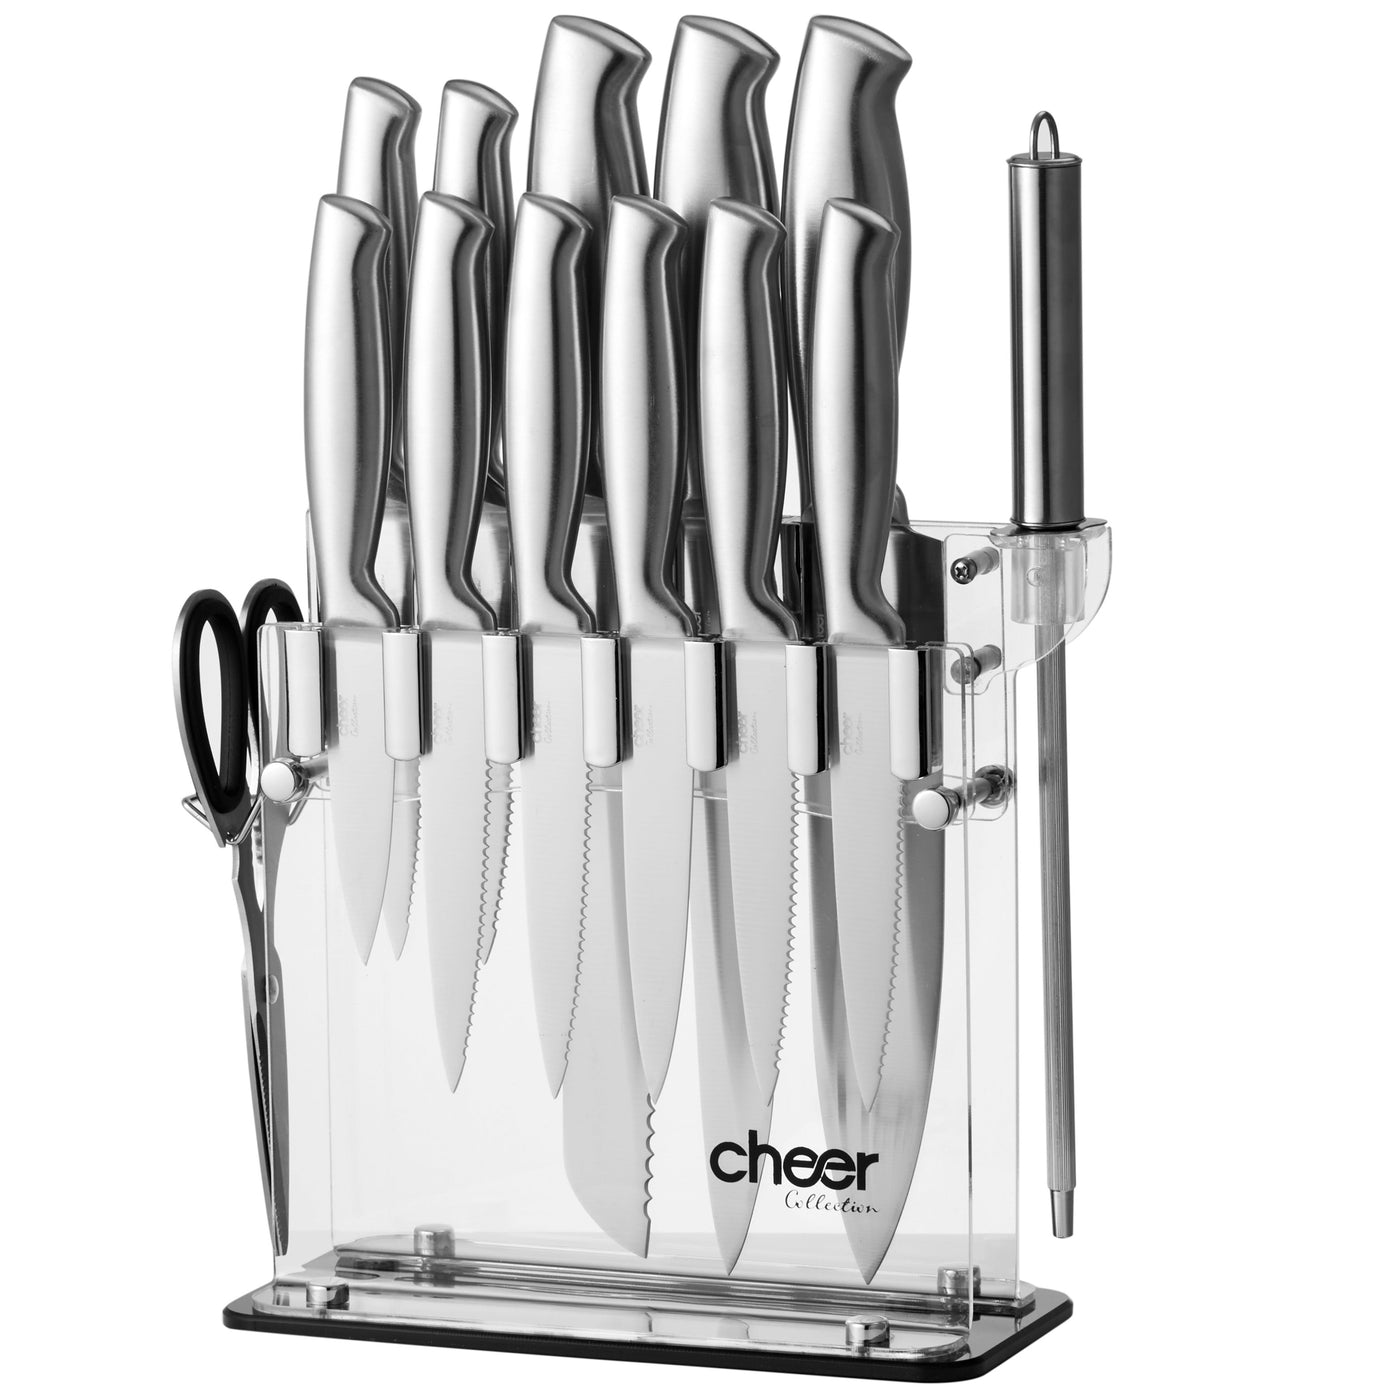 Cheer Collection Stainless Steel Chef Knife Set with Acrylic Stand  (14-Piece) Professional Kitchen Utensils - Sharp Serrated and Standard  Blades for